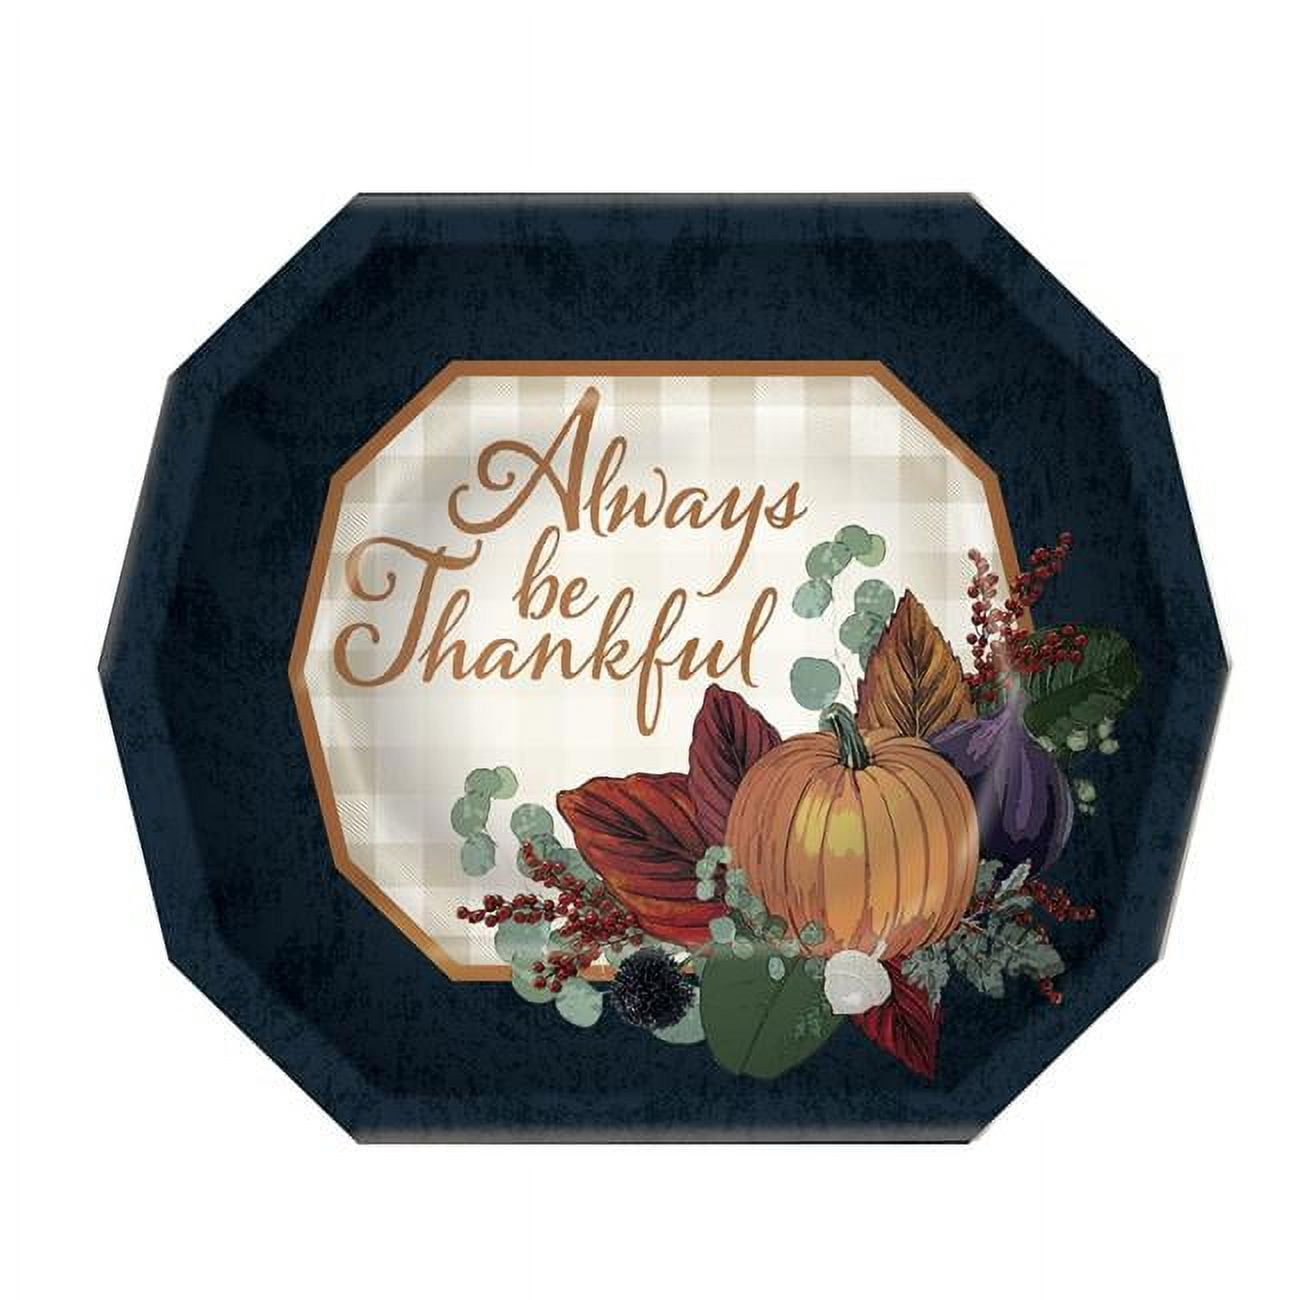 Picture of Beistle 90030 9 x 11 in. Fall Thanksgiving Dinner Plate